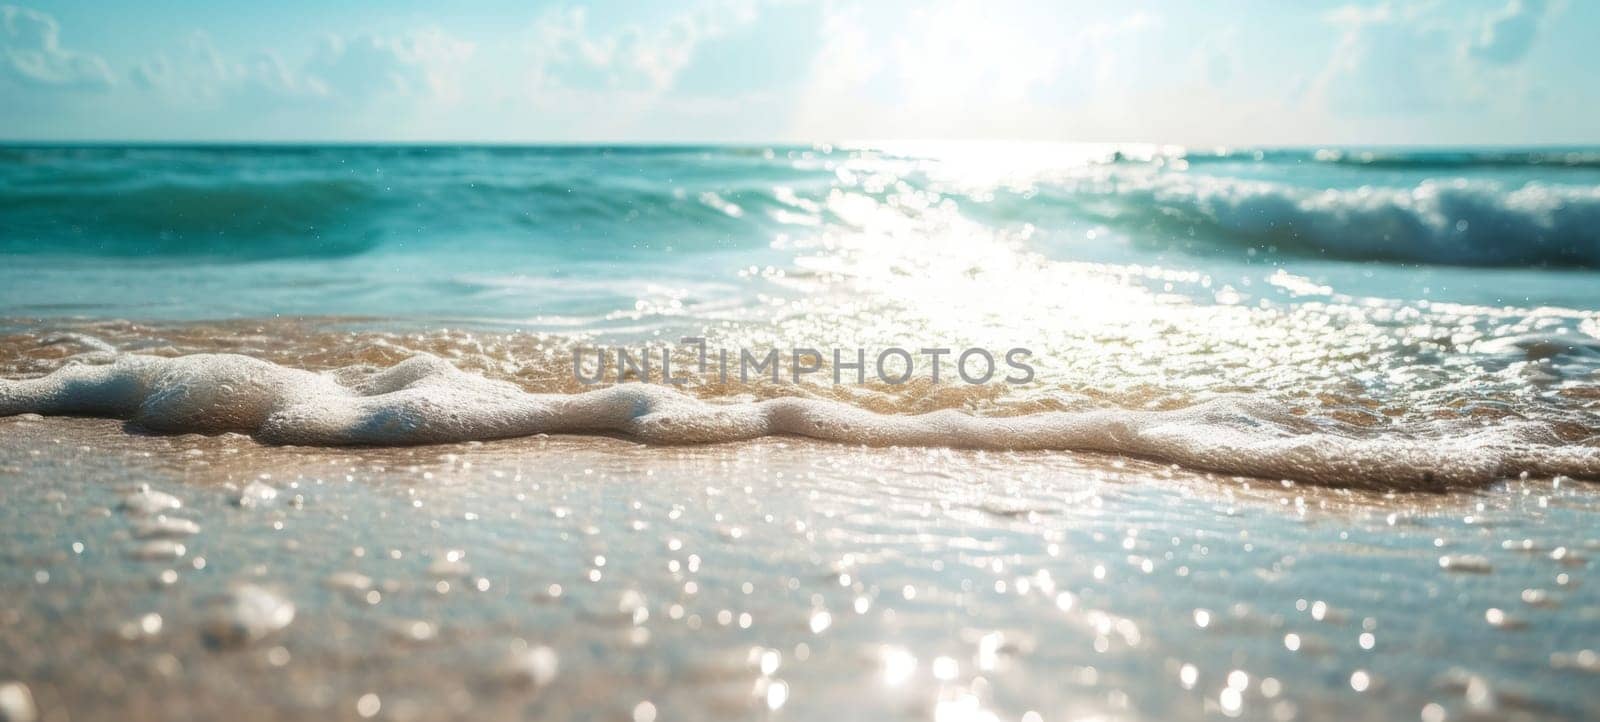 A serene seascape captures the gentle caress of waves on sunlit beach sand, a moment of calm embodied in nature's soft touch